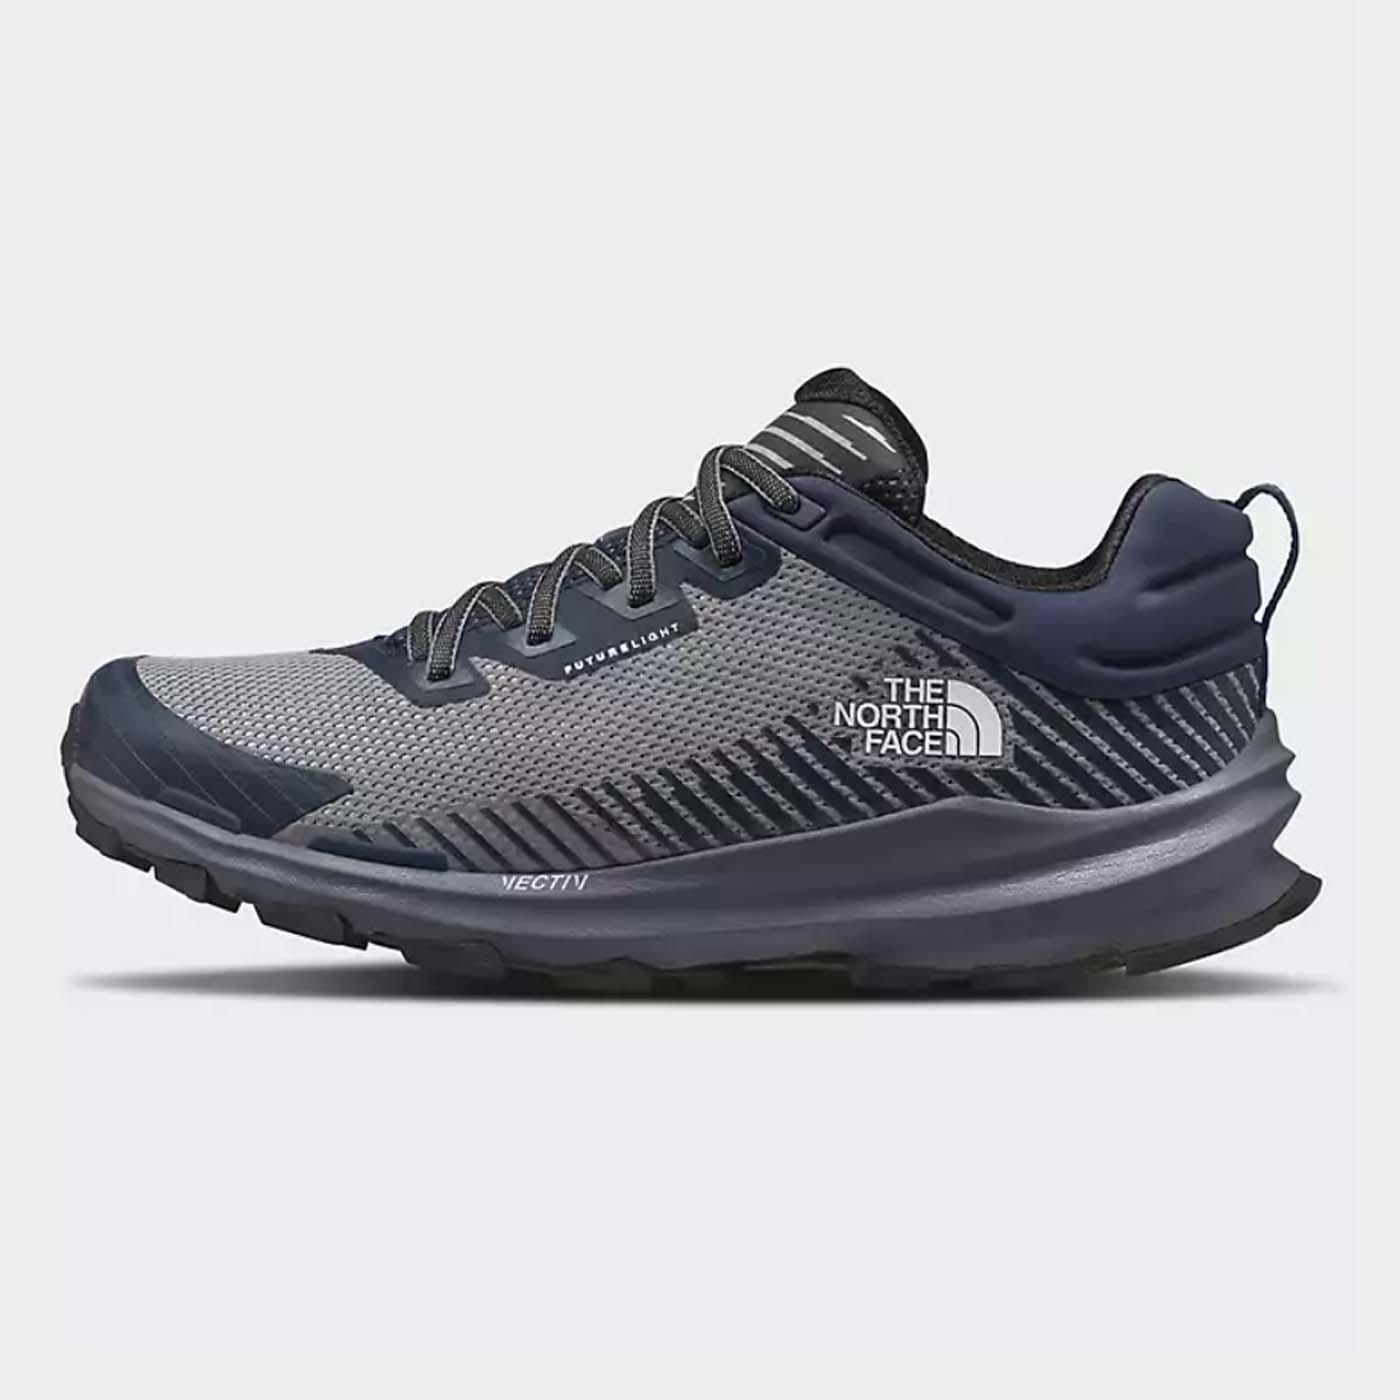 The North Face Men’s VECTIV Fastpack FUTURELIGHT Shoes in gray and black